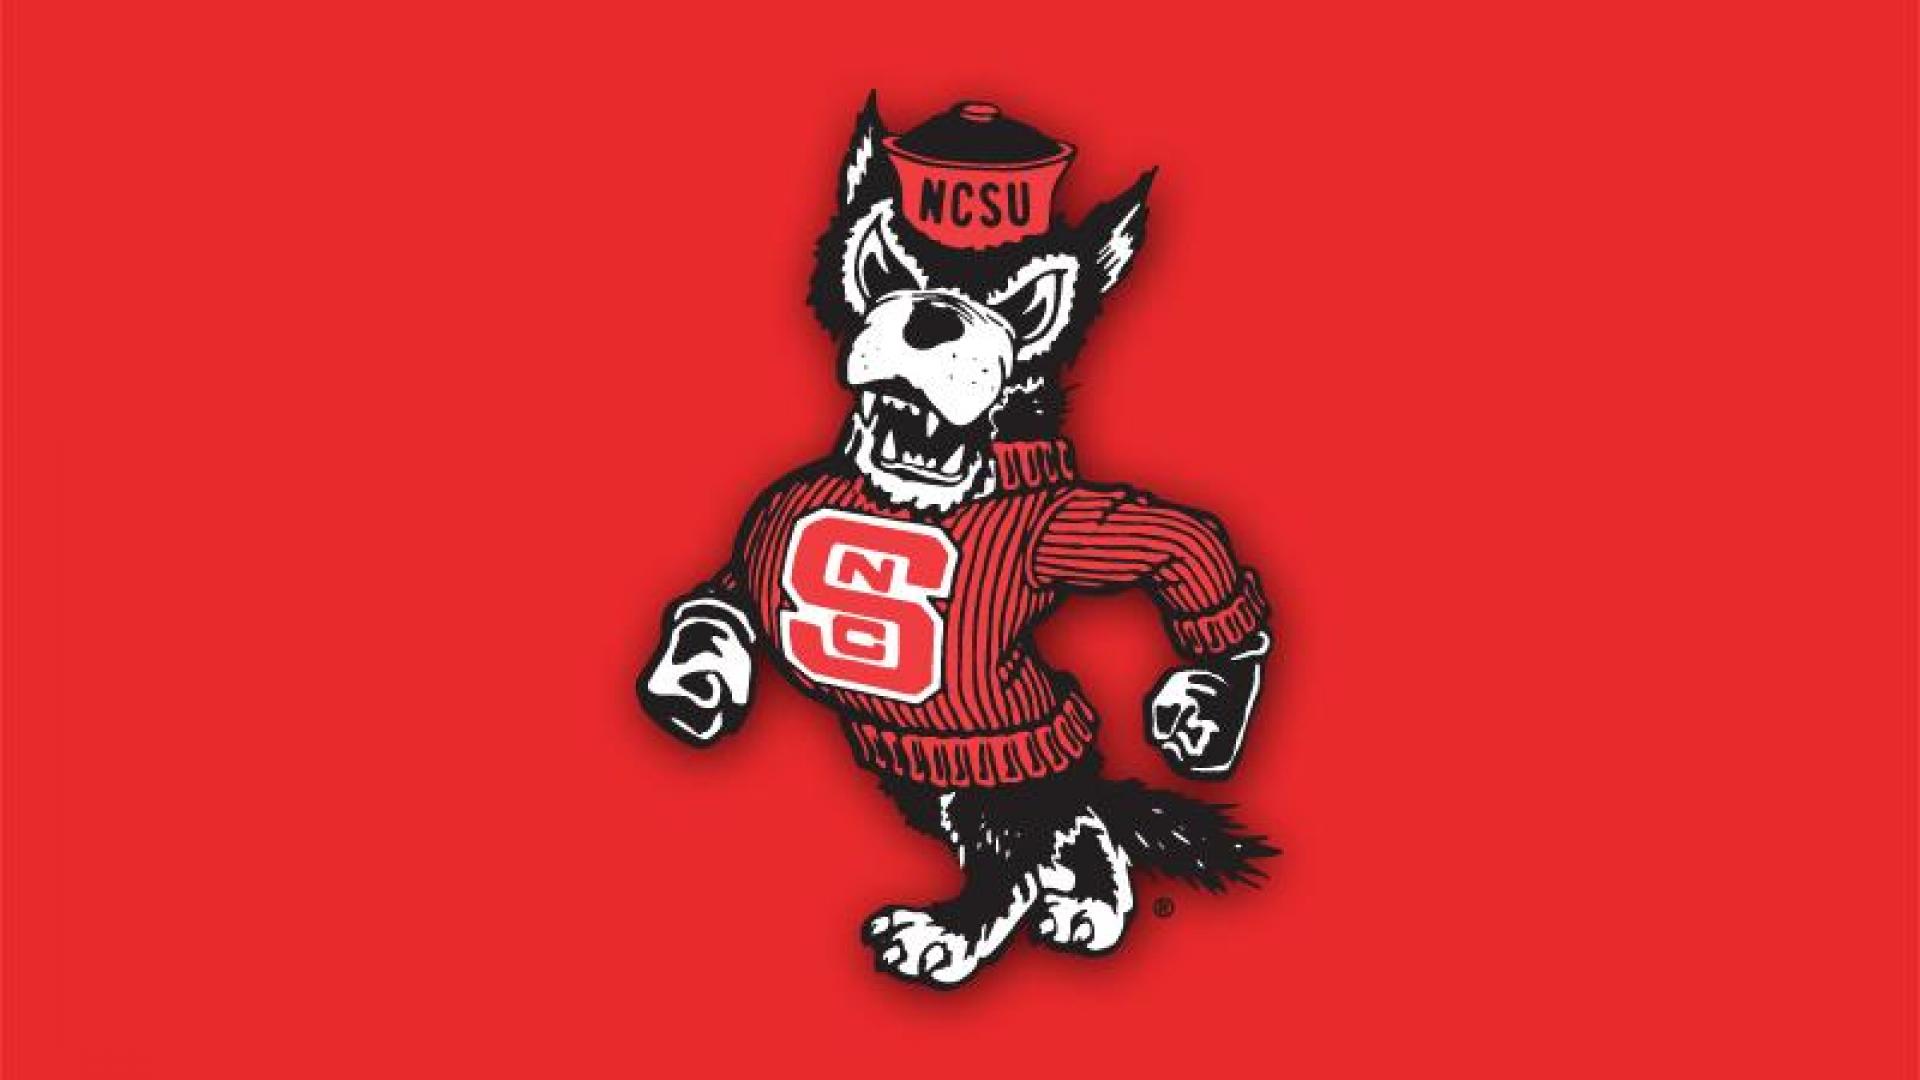 Ncsu Logo High Quality And Resolution Wallpaper On